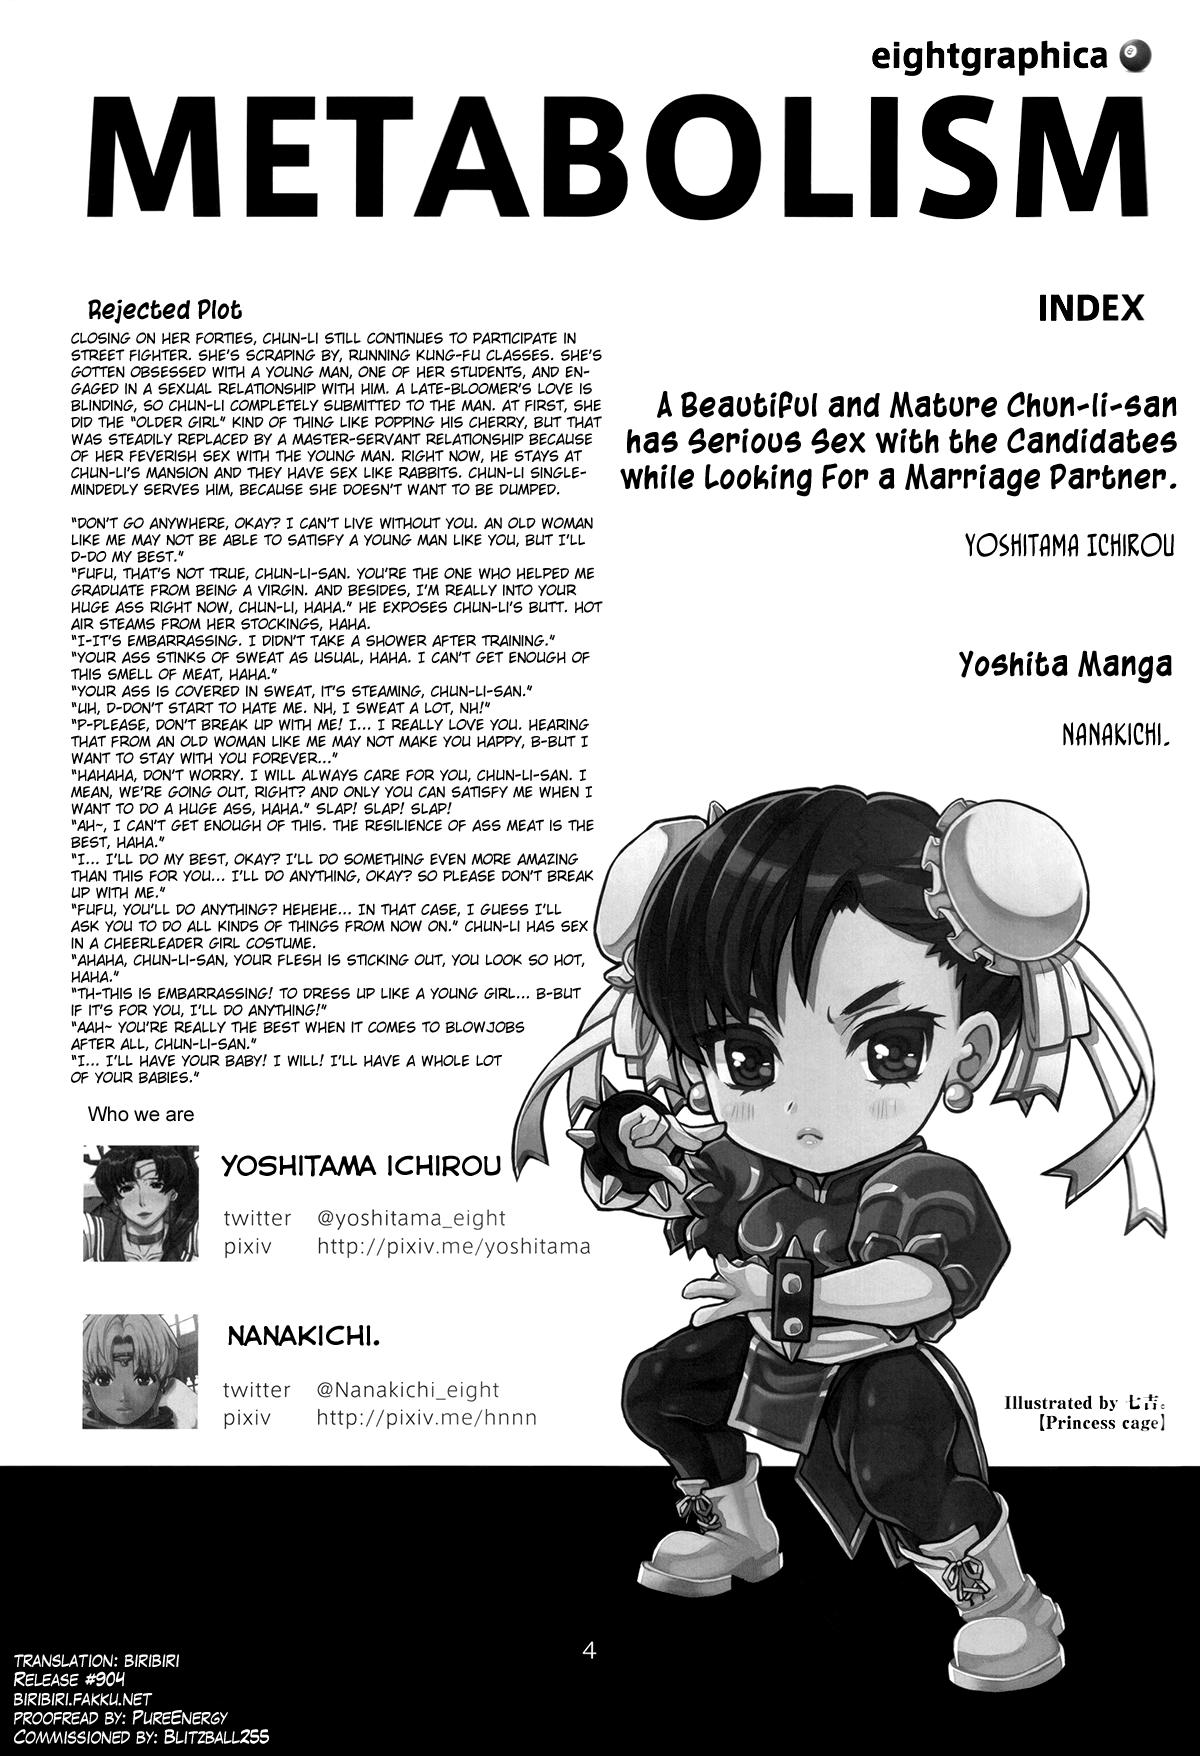 METABOLISM ChunLi-san has Serious Sex with the Candidates while Looking For a Marriage Partner. 3